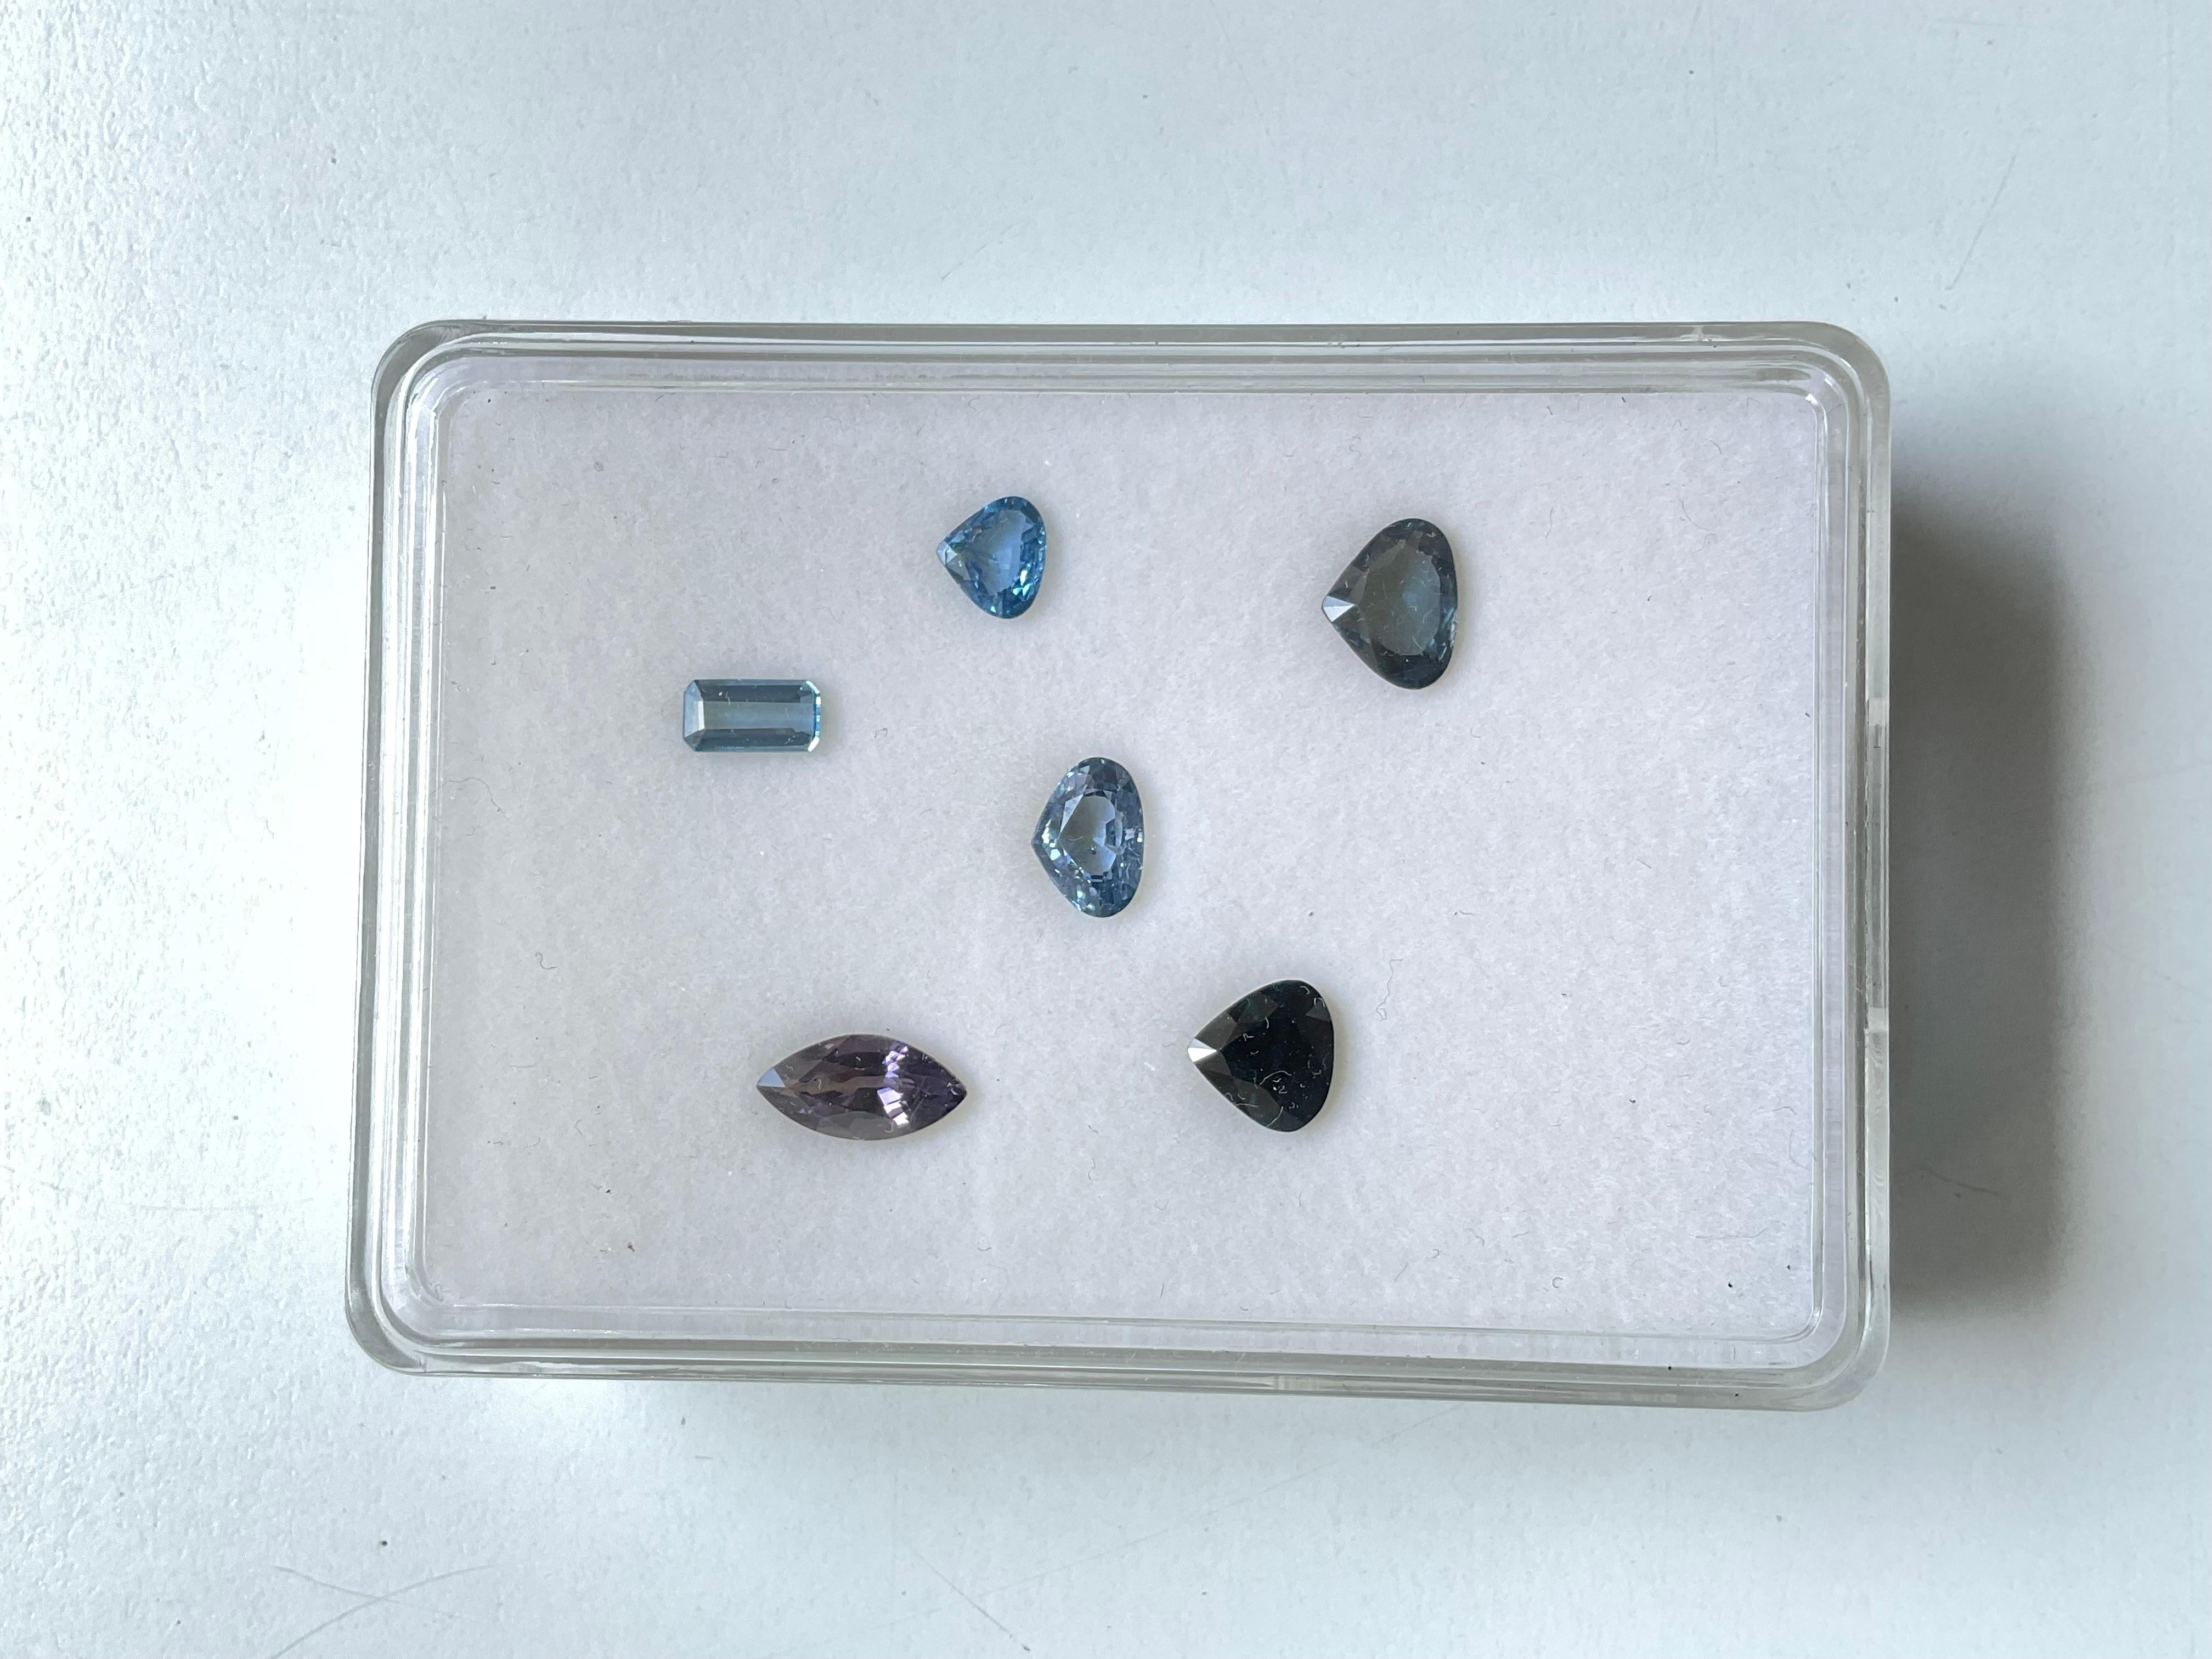 10.47 Carat Grey & Blue Spinel Tanzania Faceted Fancy Cut stone Natural Gemstone For Sale 2